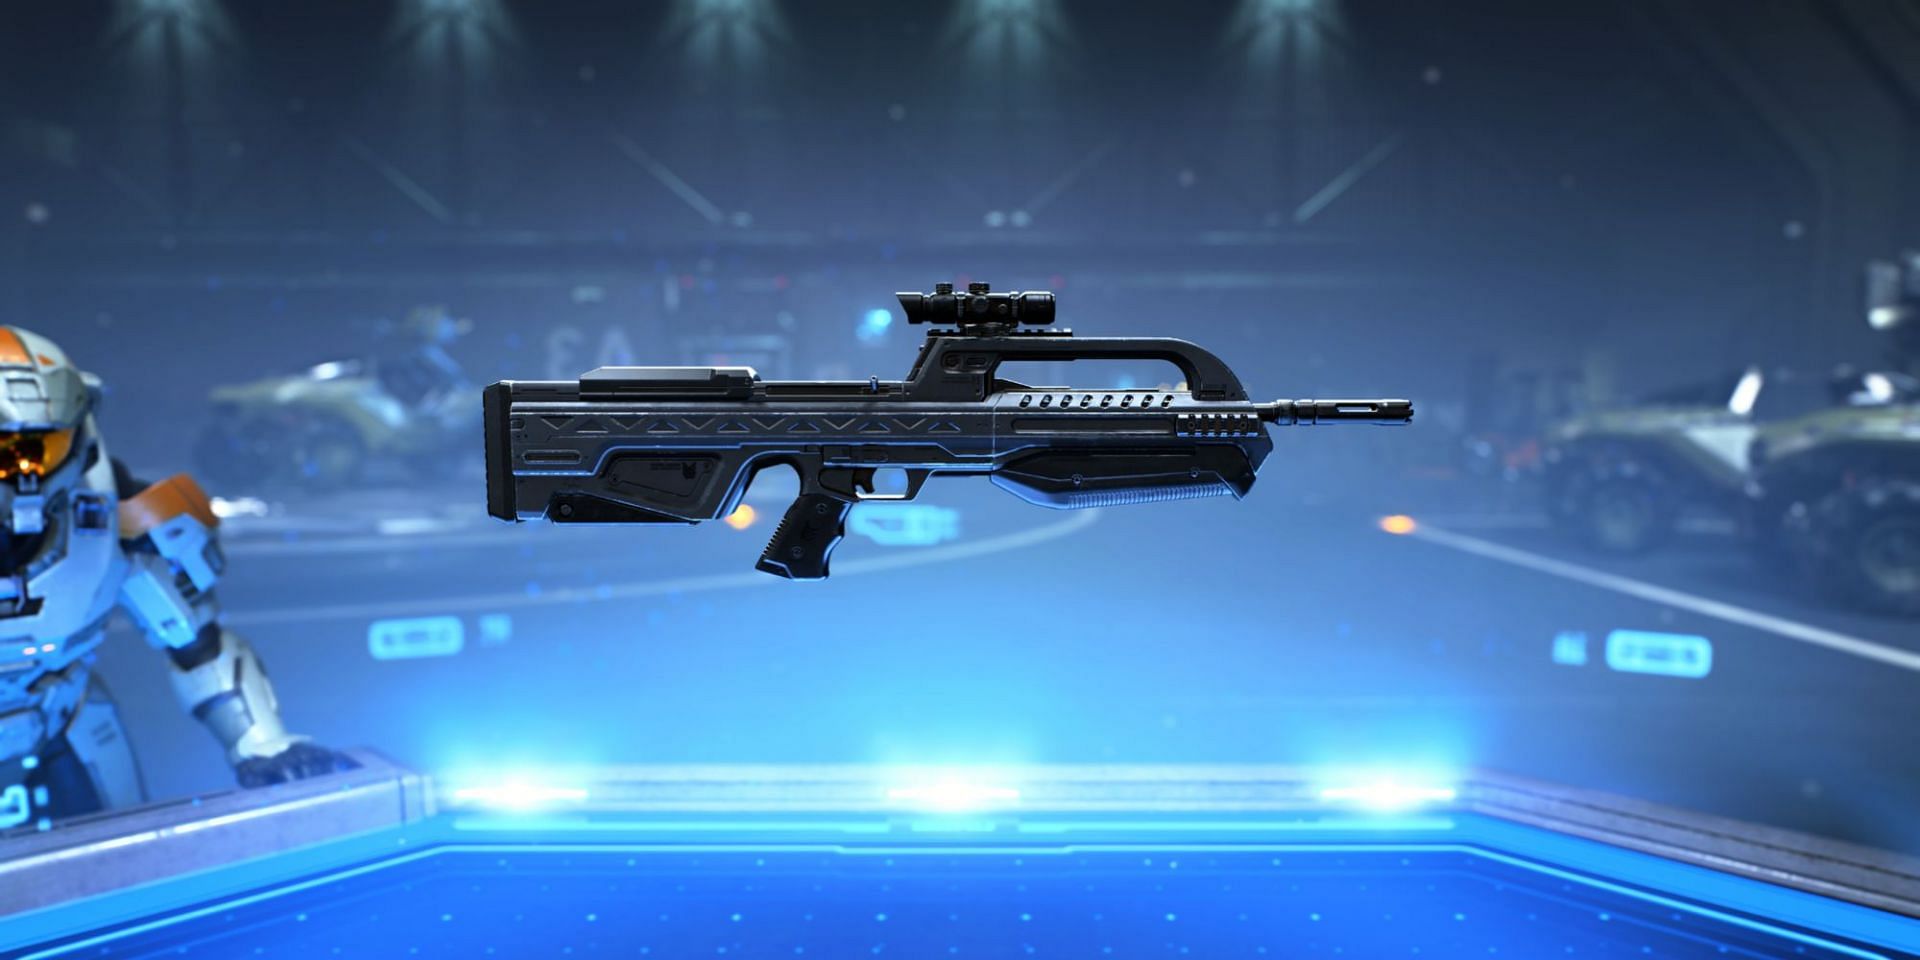 The BR75 Battle Rifle in Halo Infinite. (Image via 343 Industries)